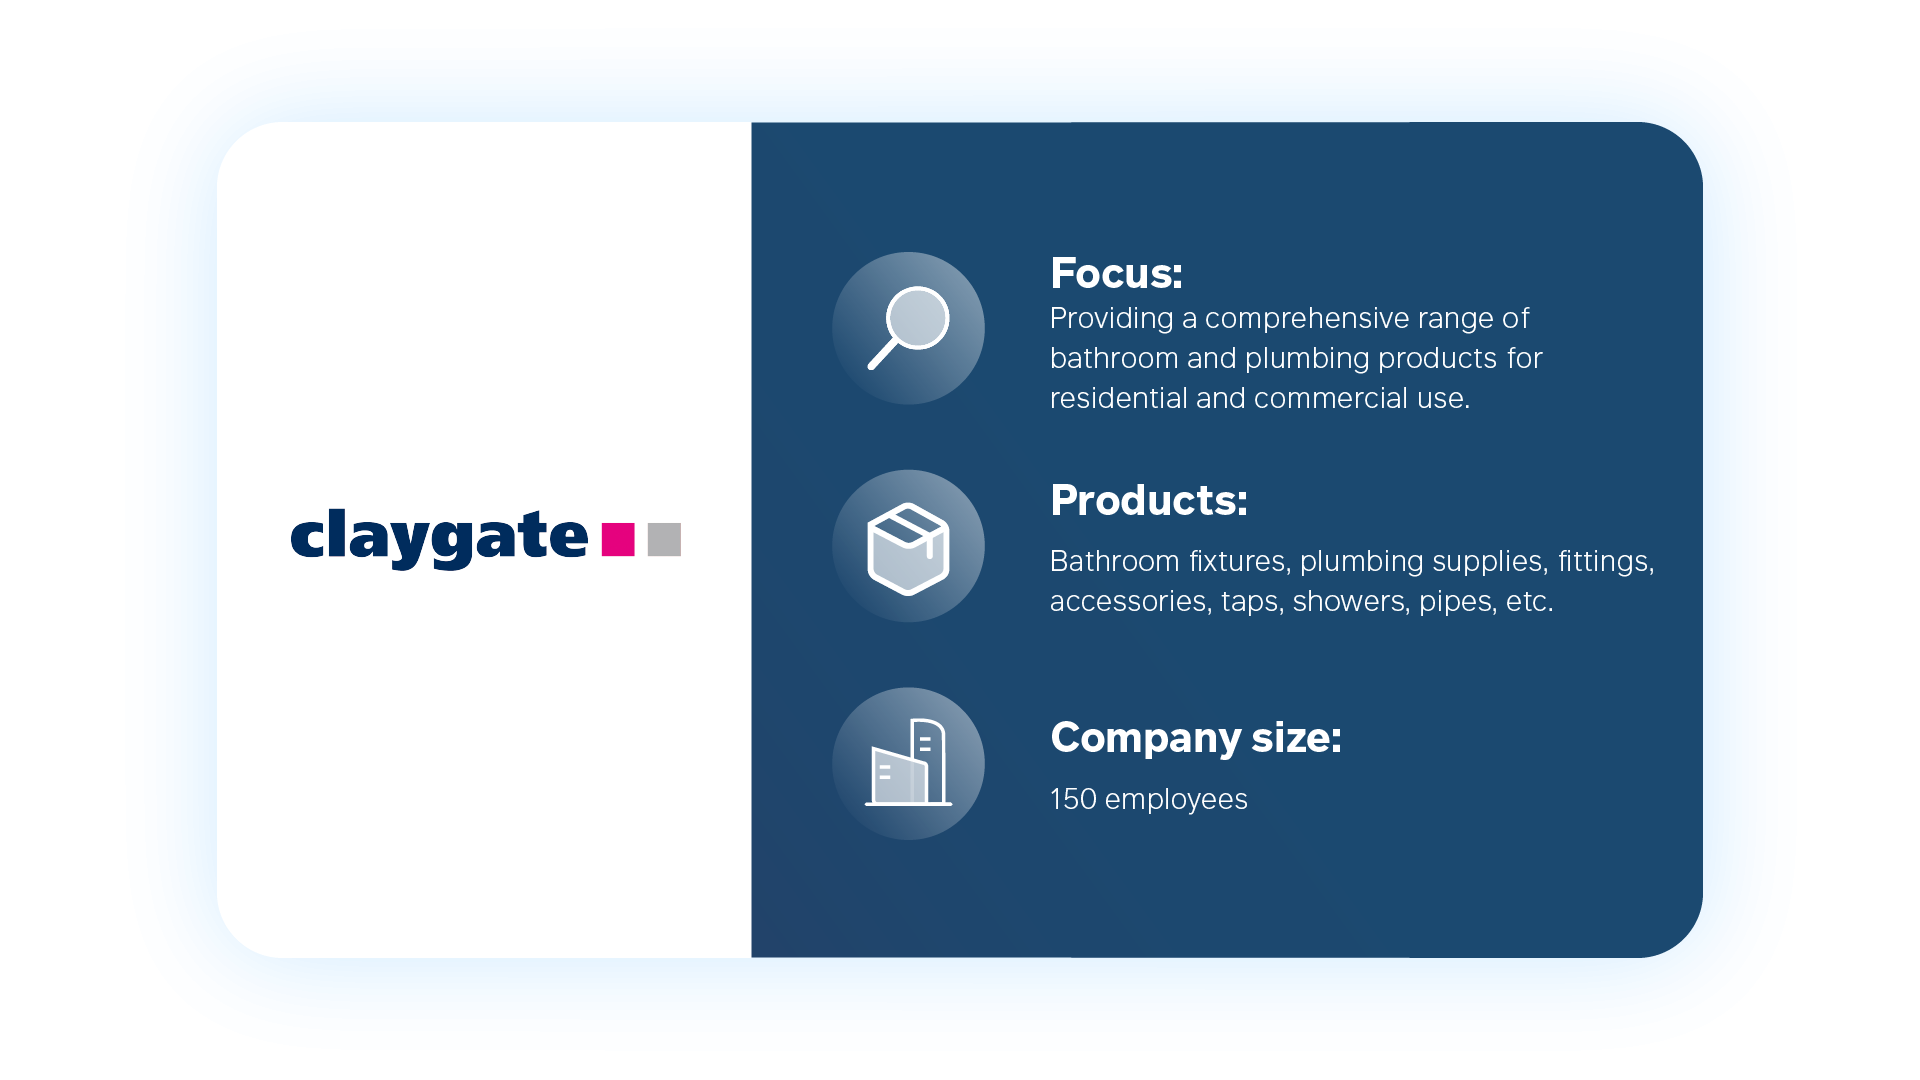 claygate Focus: Providing a comprehensive range of bathroom and plumbing products for residential and commercial use Products: Bathroom fixtures, plumbing supplies, fittings, accessories, taps, showers, pipes, etc. Company size: 150 employees